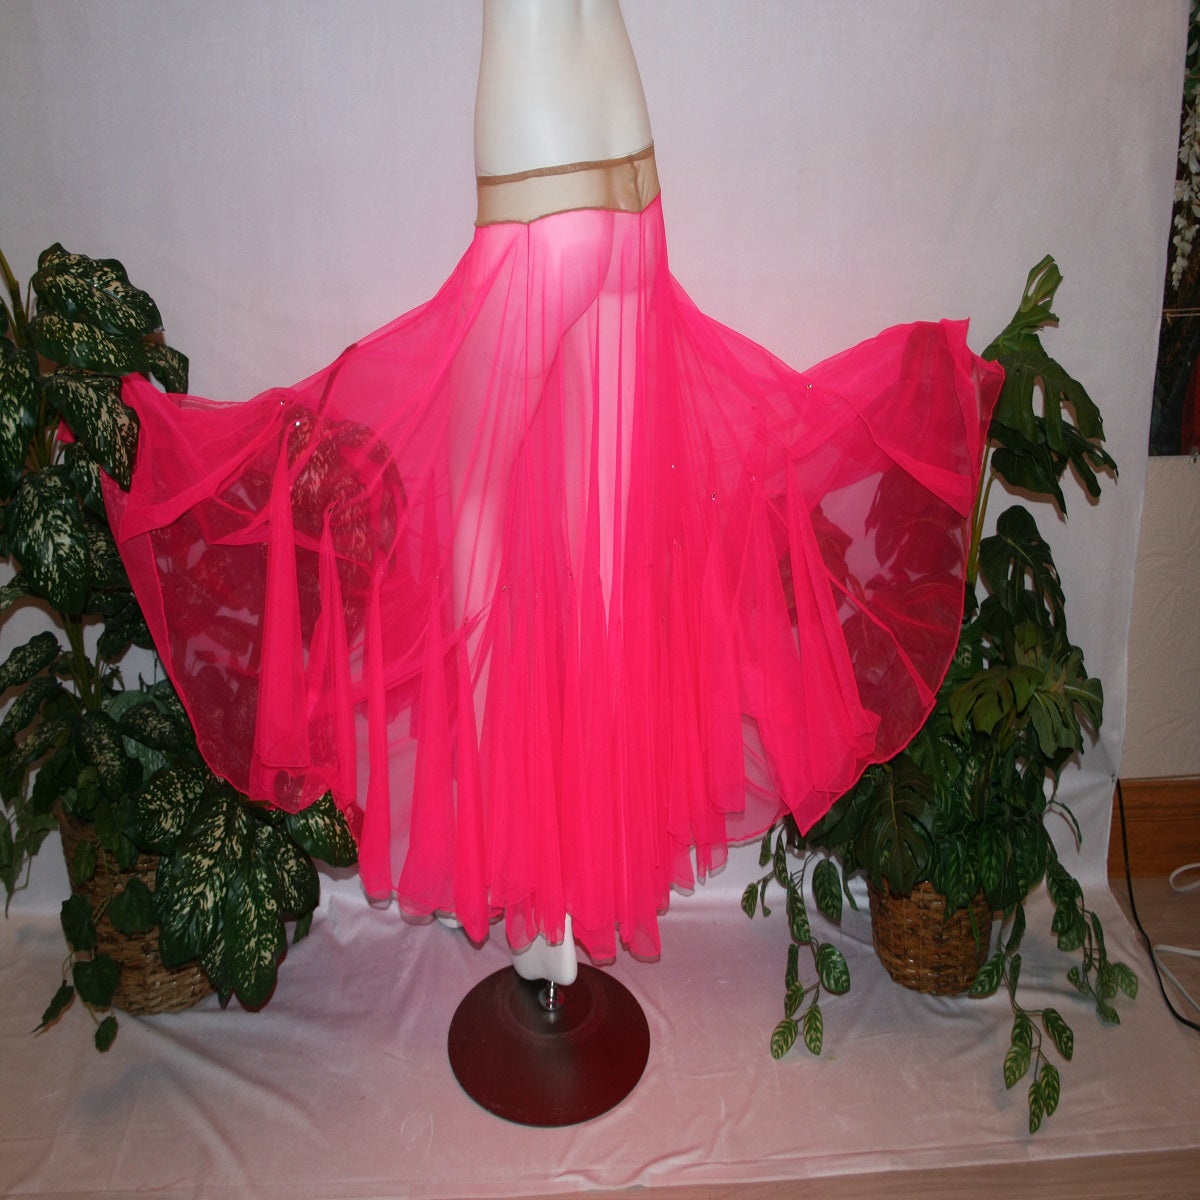 flaired side view of Hot pink ballroom skirt created with yards of hot pink sheer tricot with petal like floats around bottom embellished with tear drop Swarovski rhinestones.